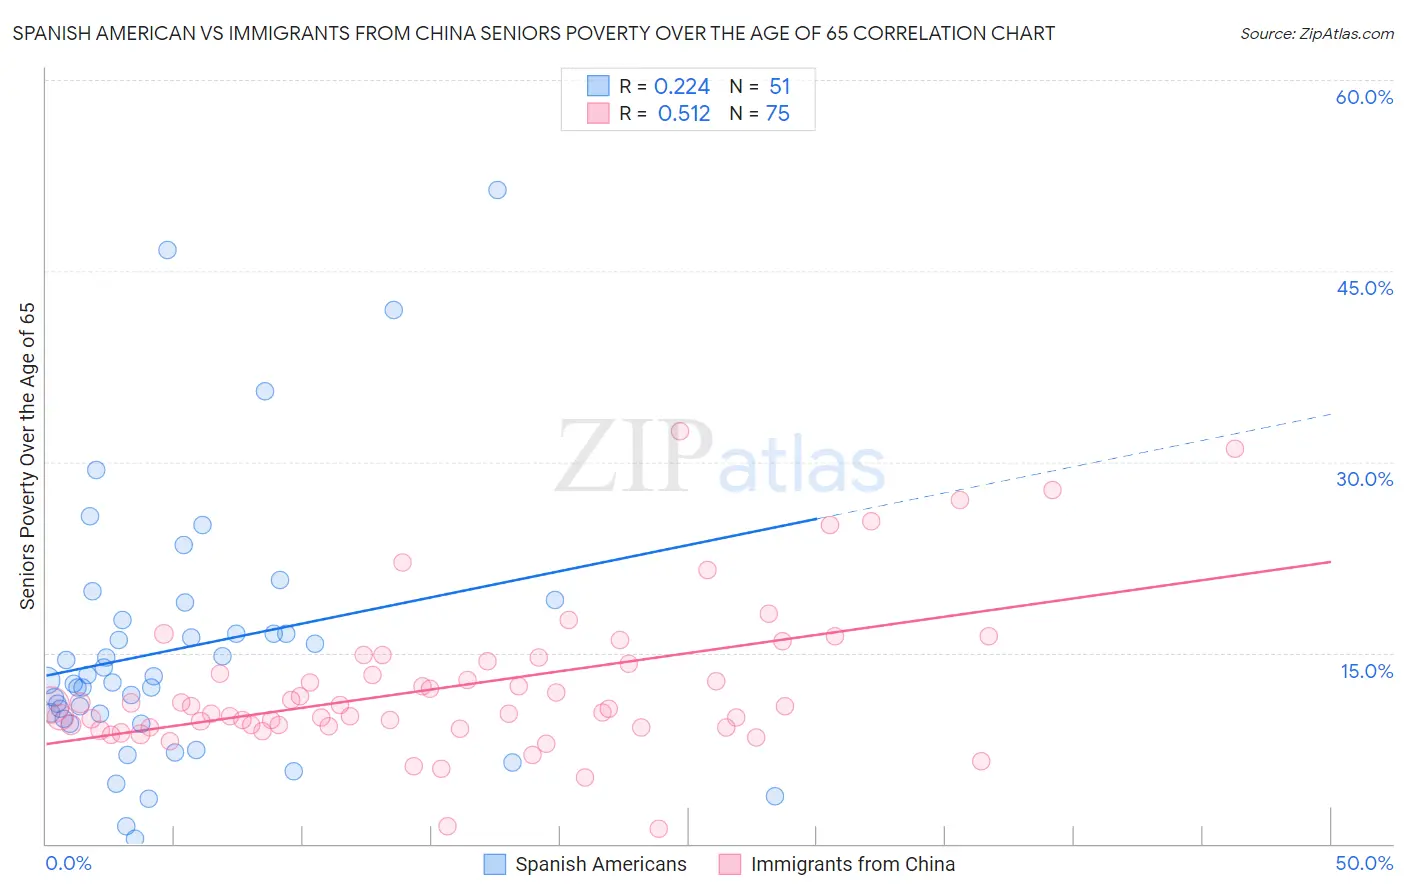 Spanish American vs Immigrants from China Seniors Poverty Over the Age of 65